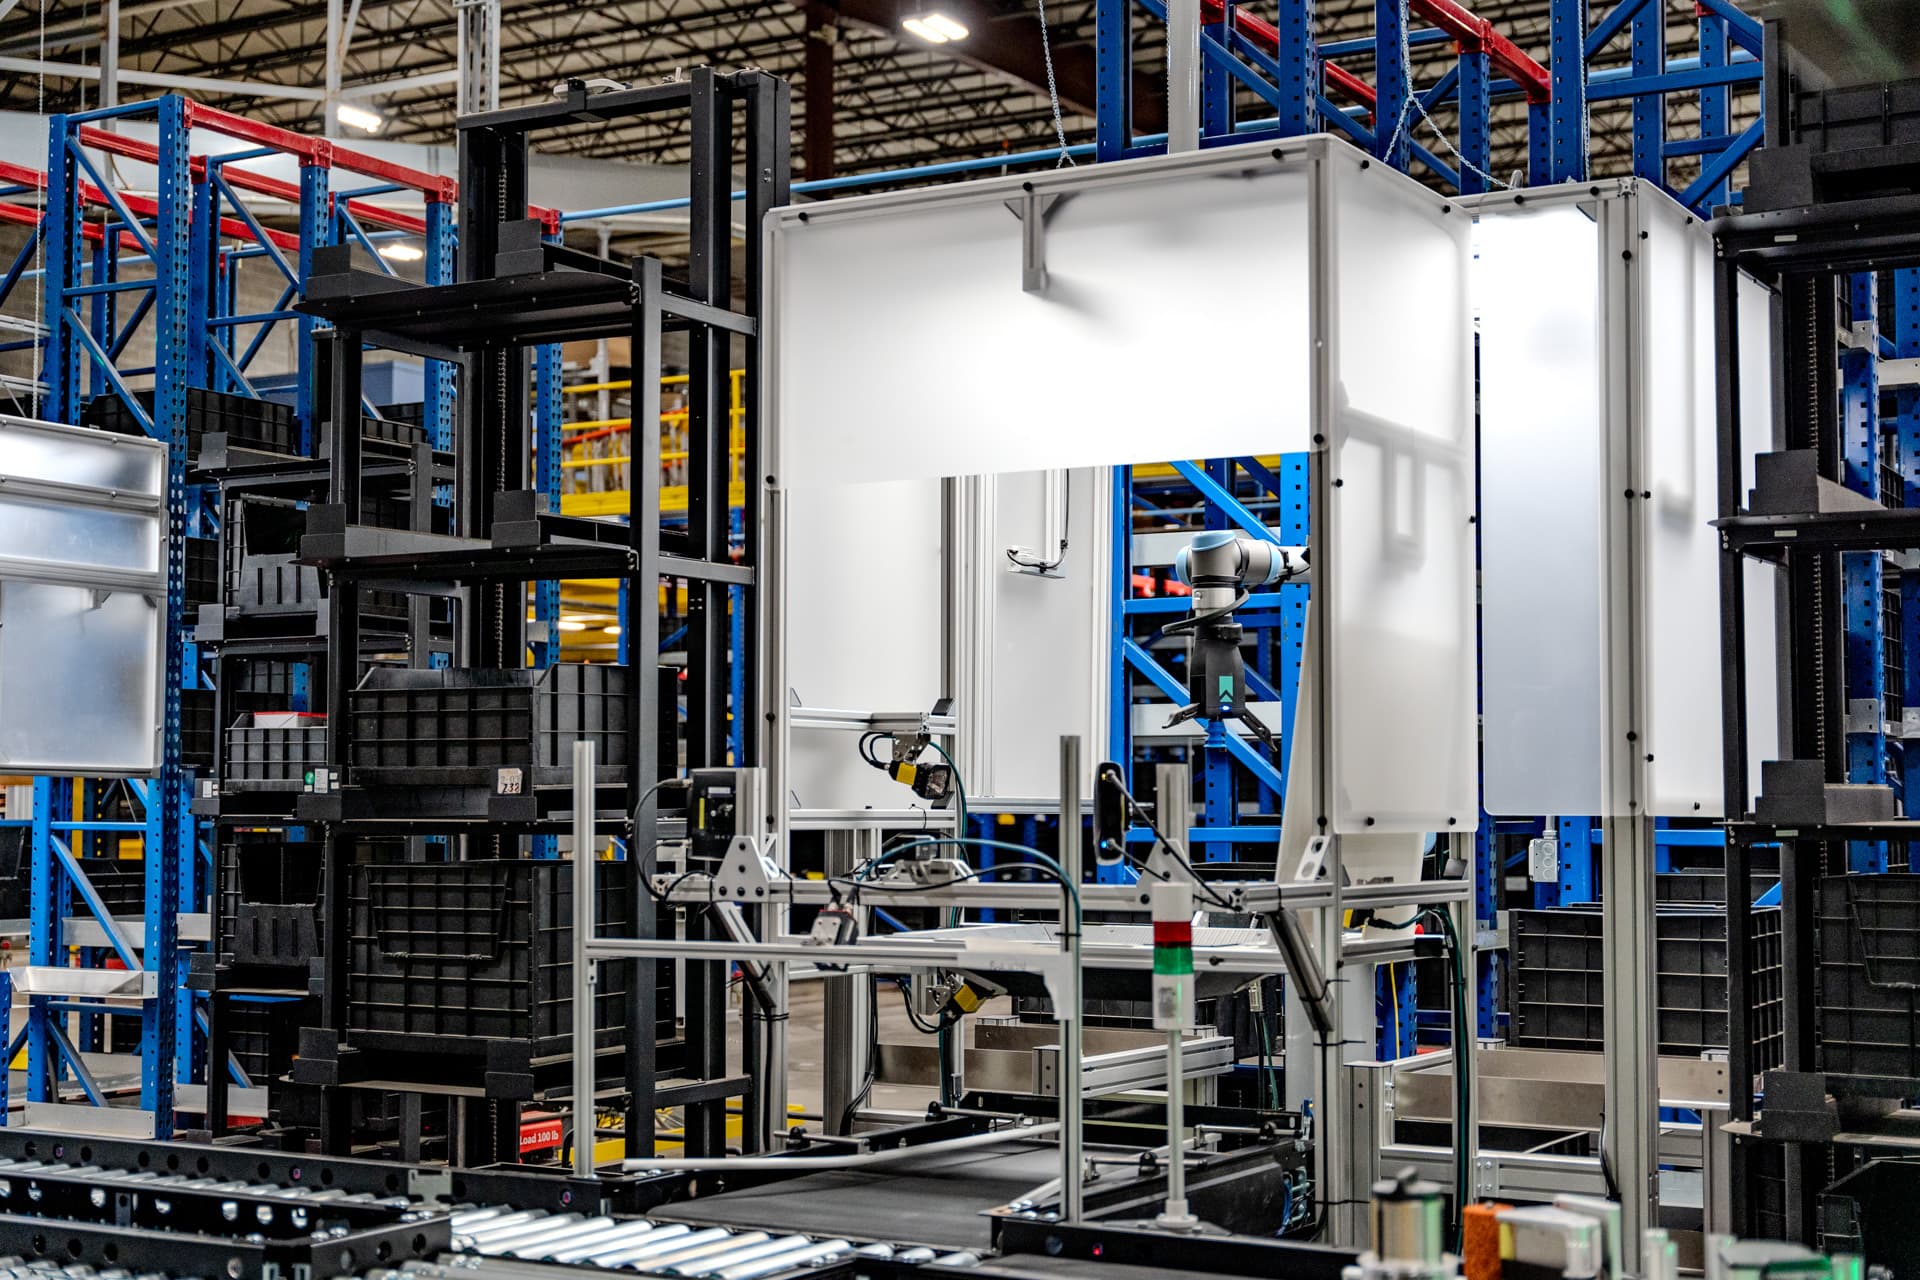 The Latest Article: Righthand robotics signs multi-year agreement with staples® to deploy ai-powered picking robots in fulfillment centers